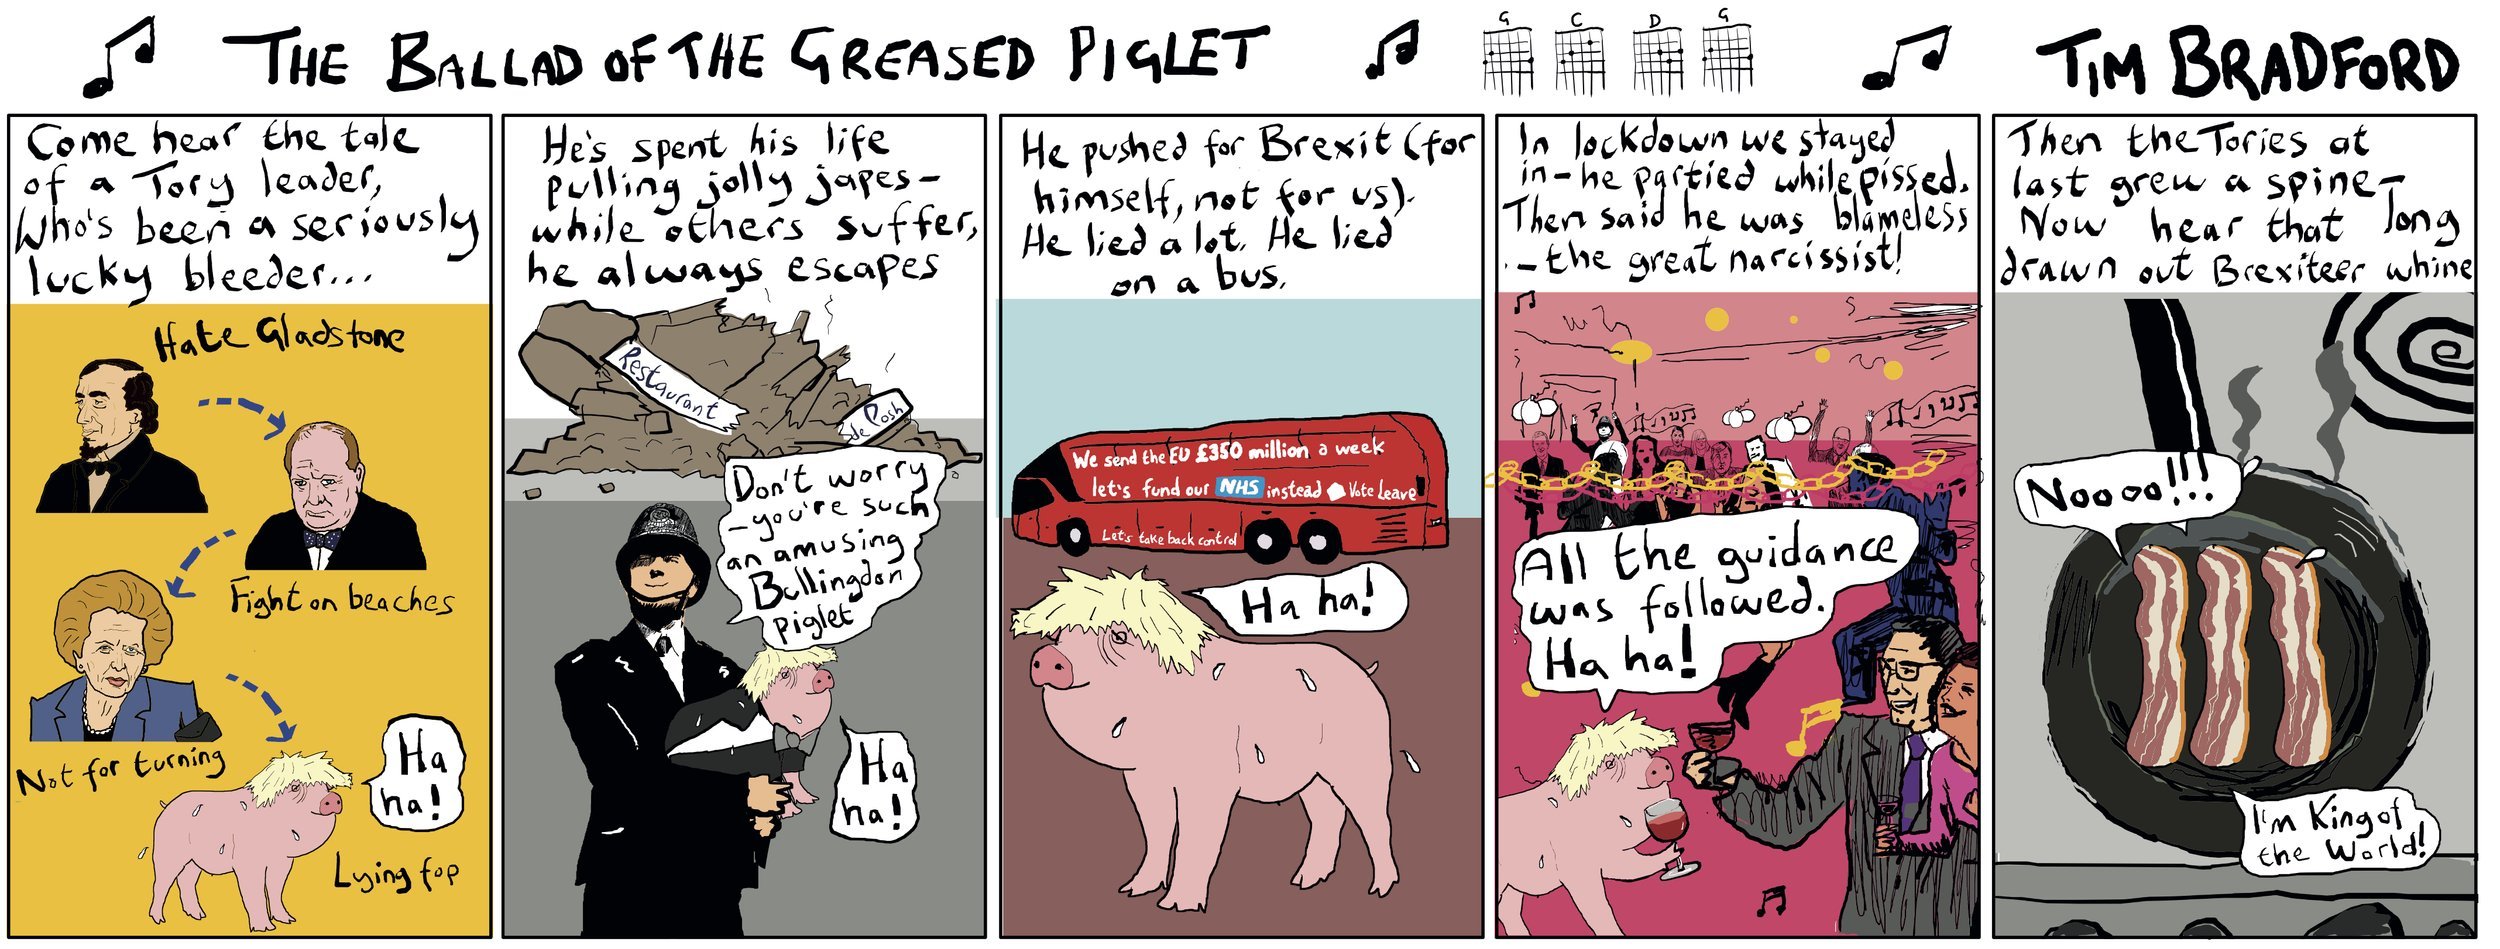 The Ballad of the Greased Piglet - 06/06/2022